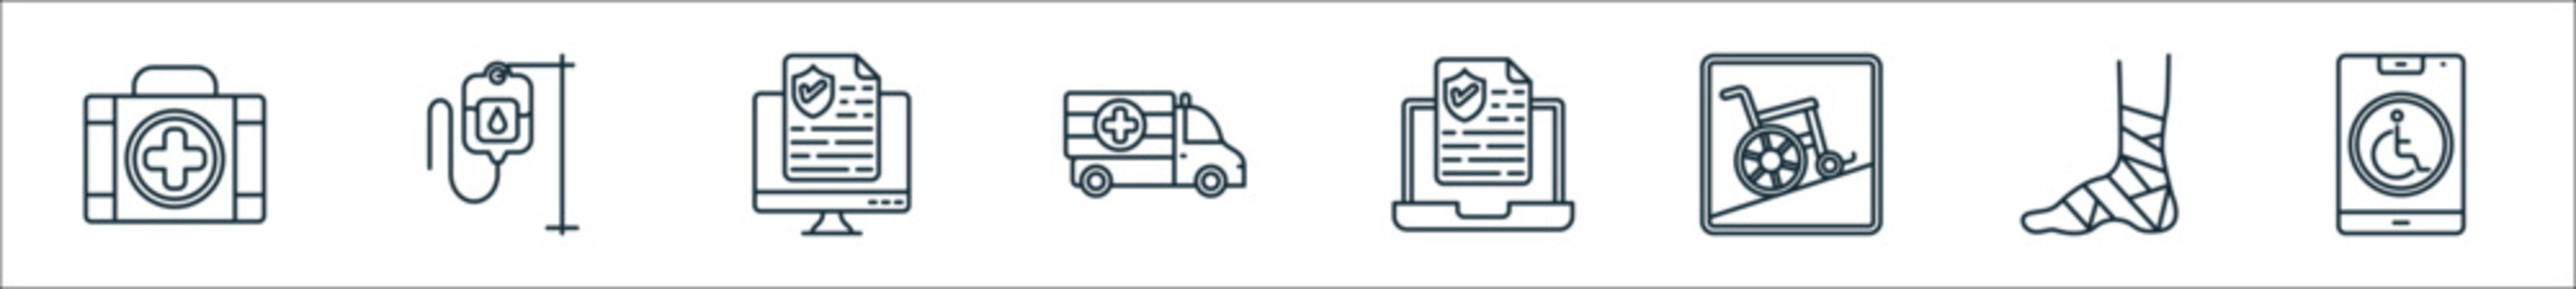 outline set of persons with disabilities line icons. linear vector icons such as medical kit, blood bag, insurance, ambulance, insurance, disabled, injured, mobile phone